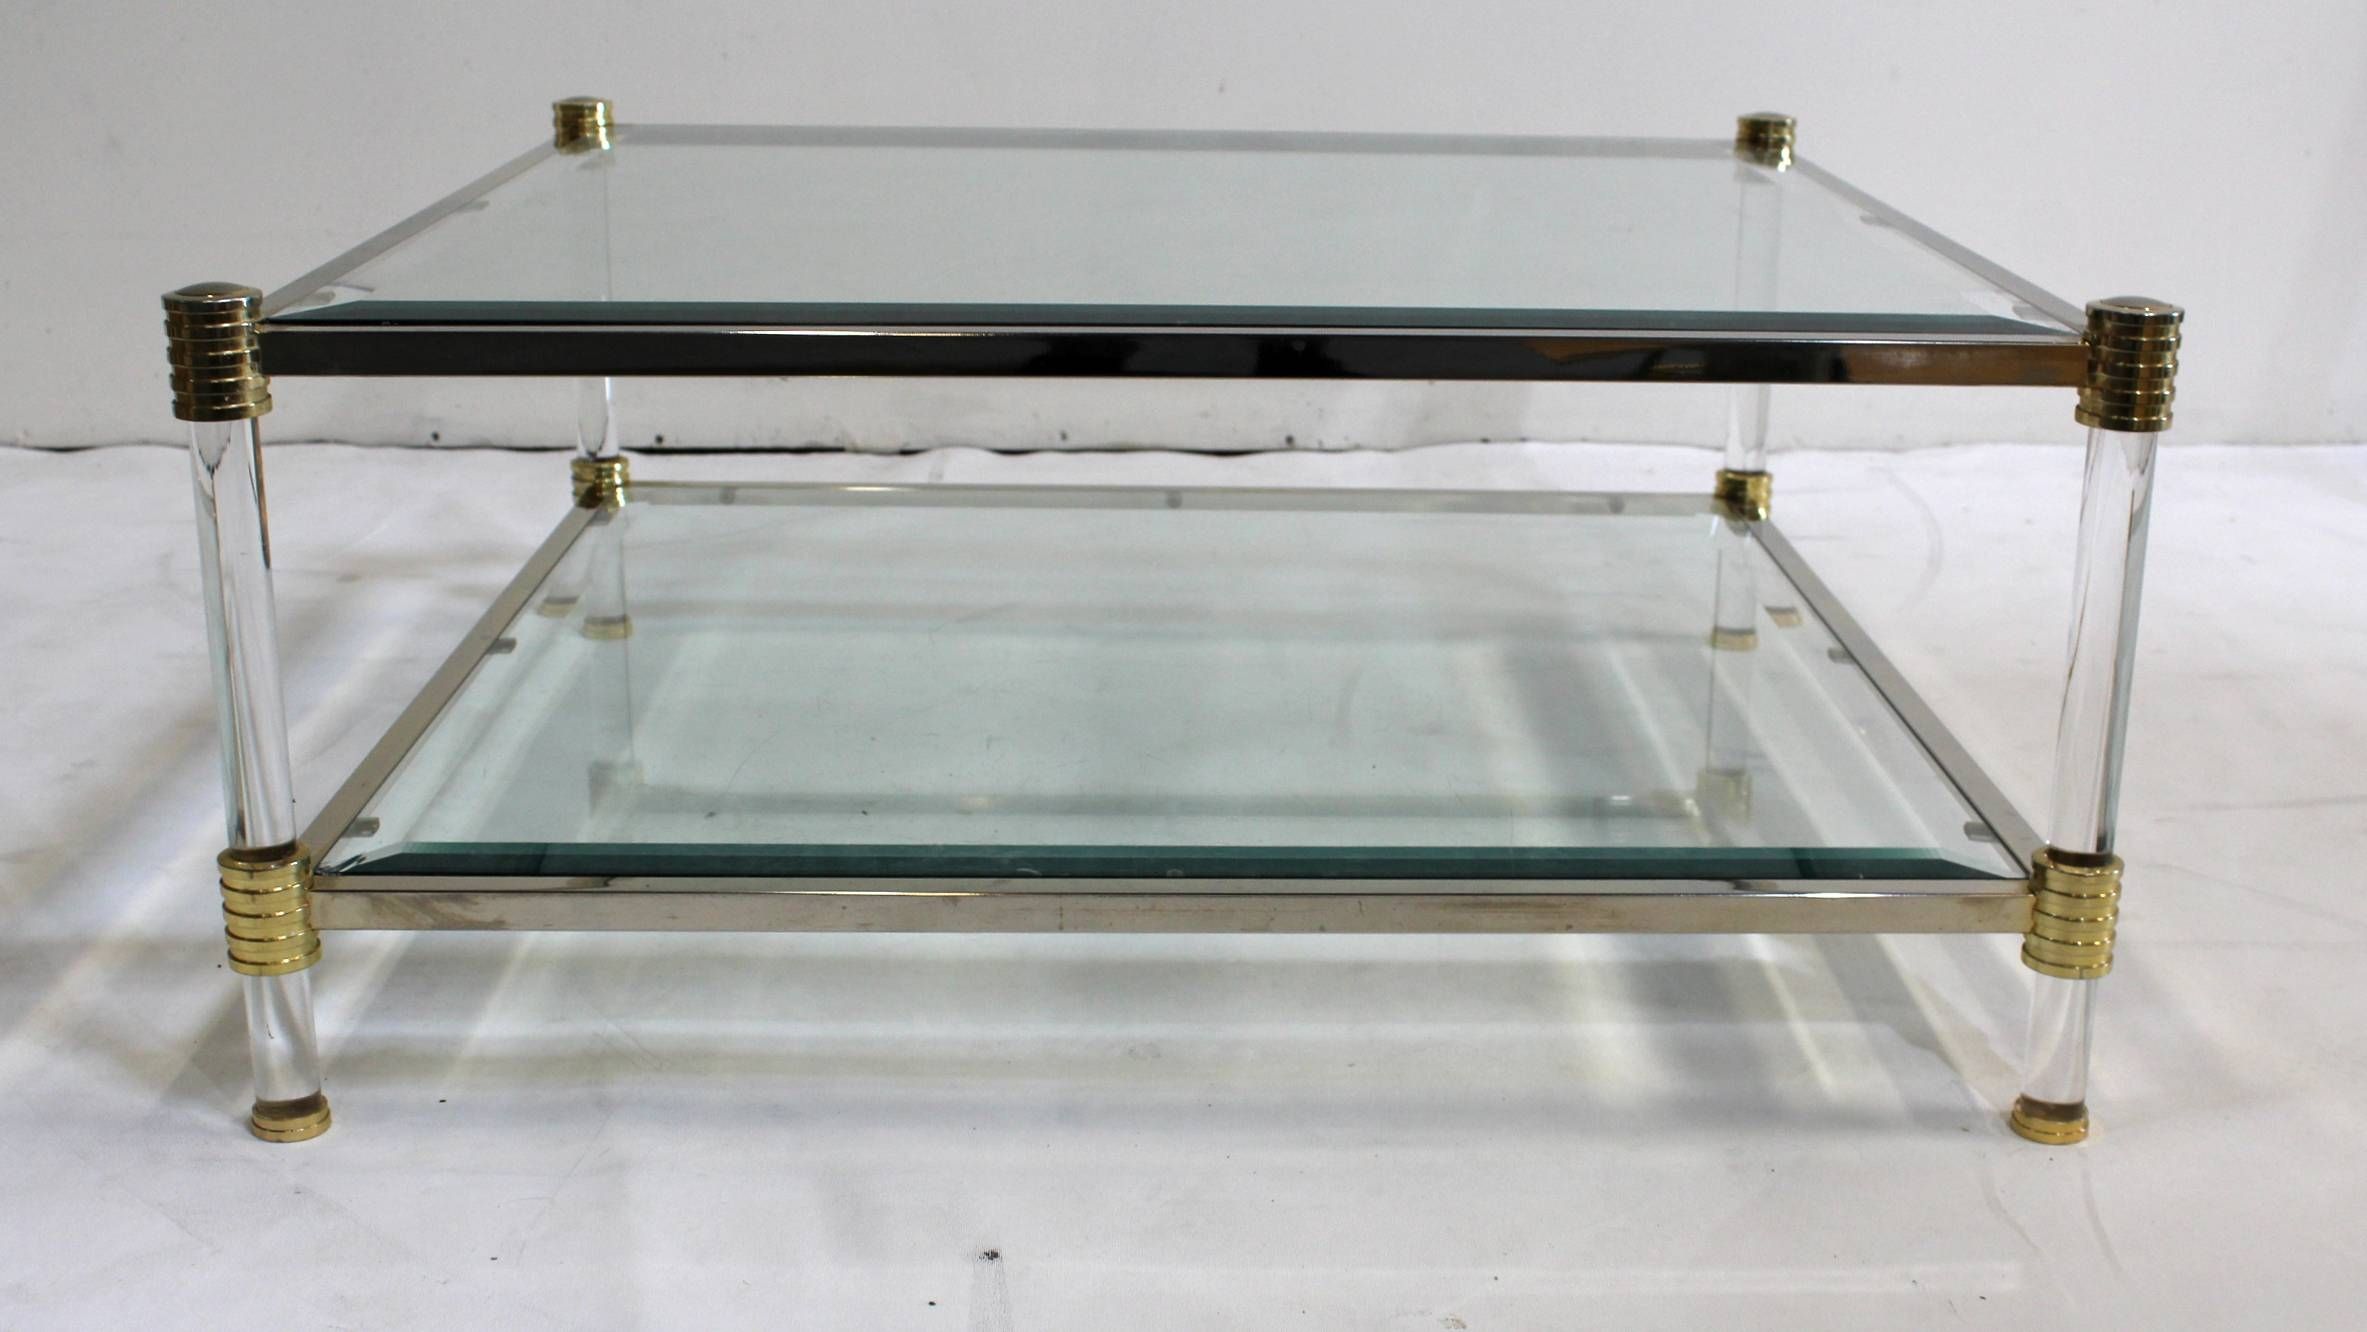 Vintage Style Coffee Table | Brass Chrome Lucite And Glass Coffee For Chrome And Glass Coffee Tables (View 28 of 30)